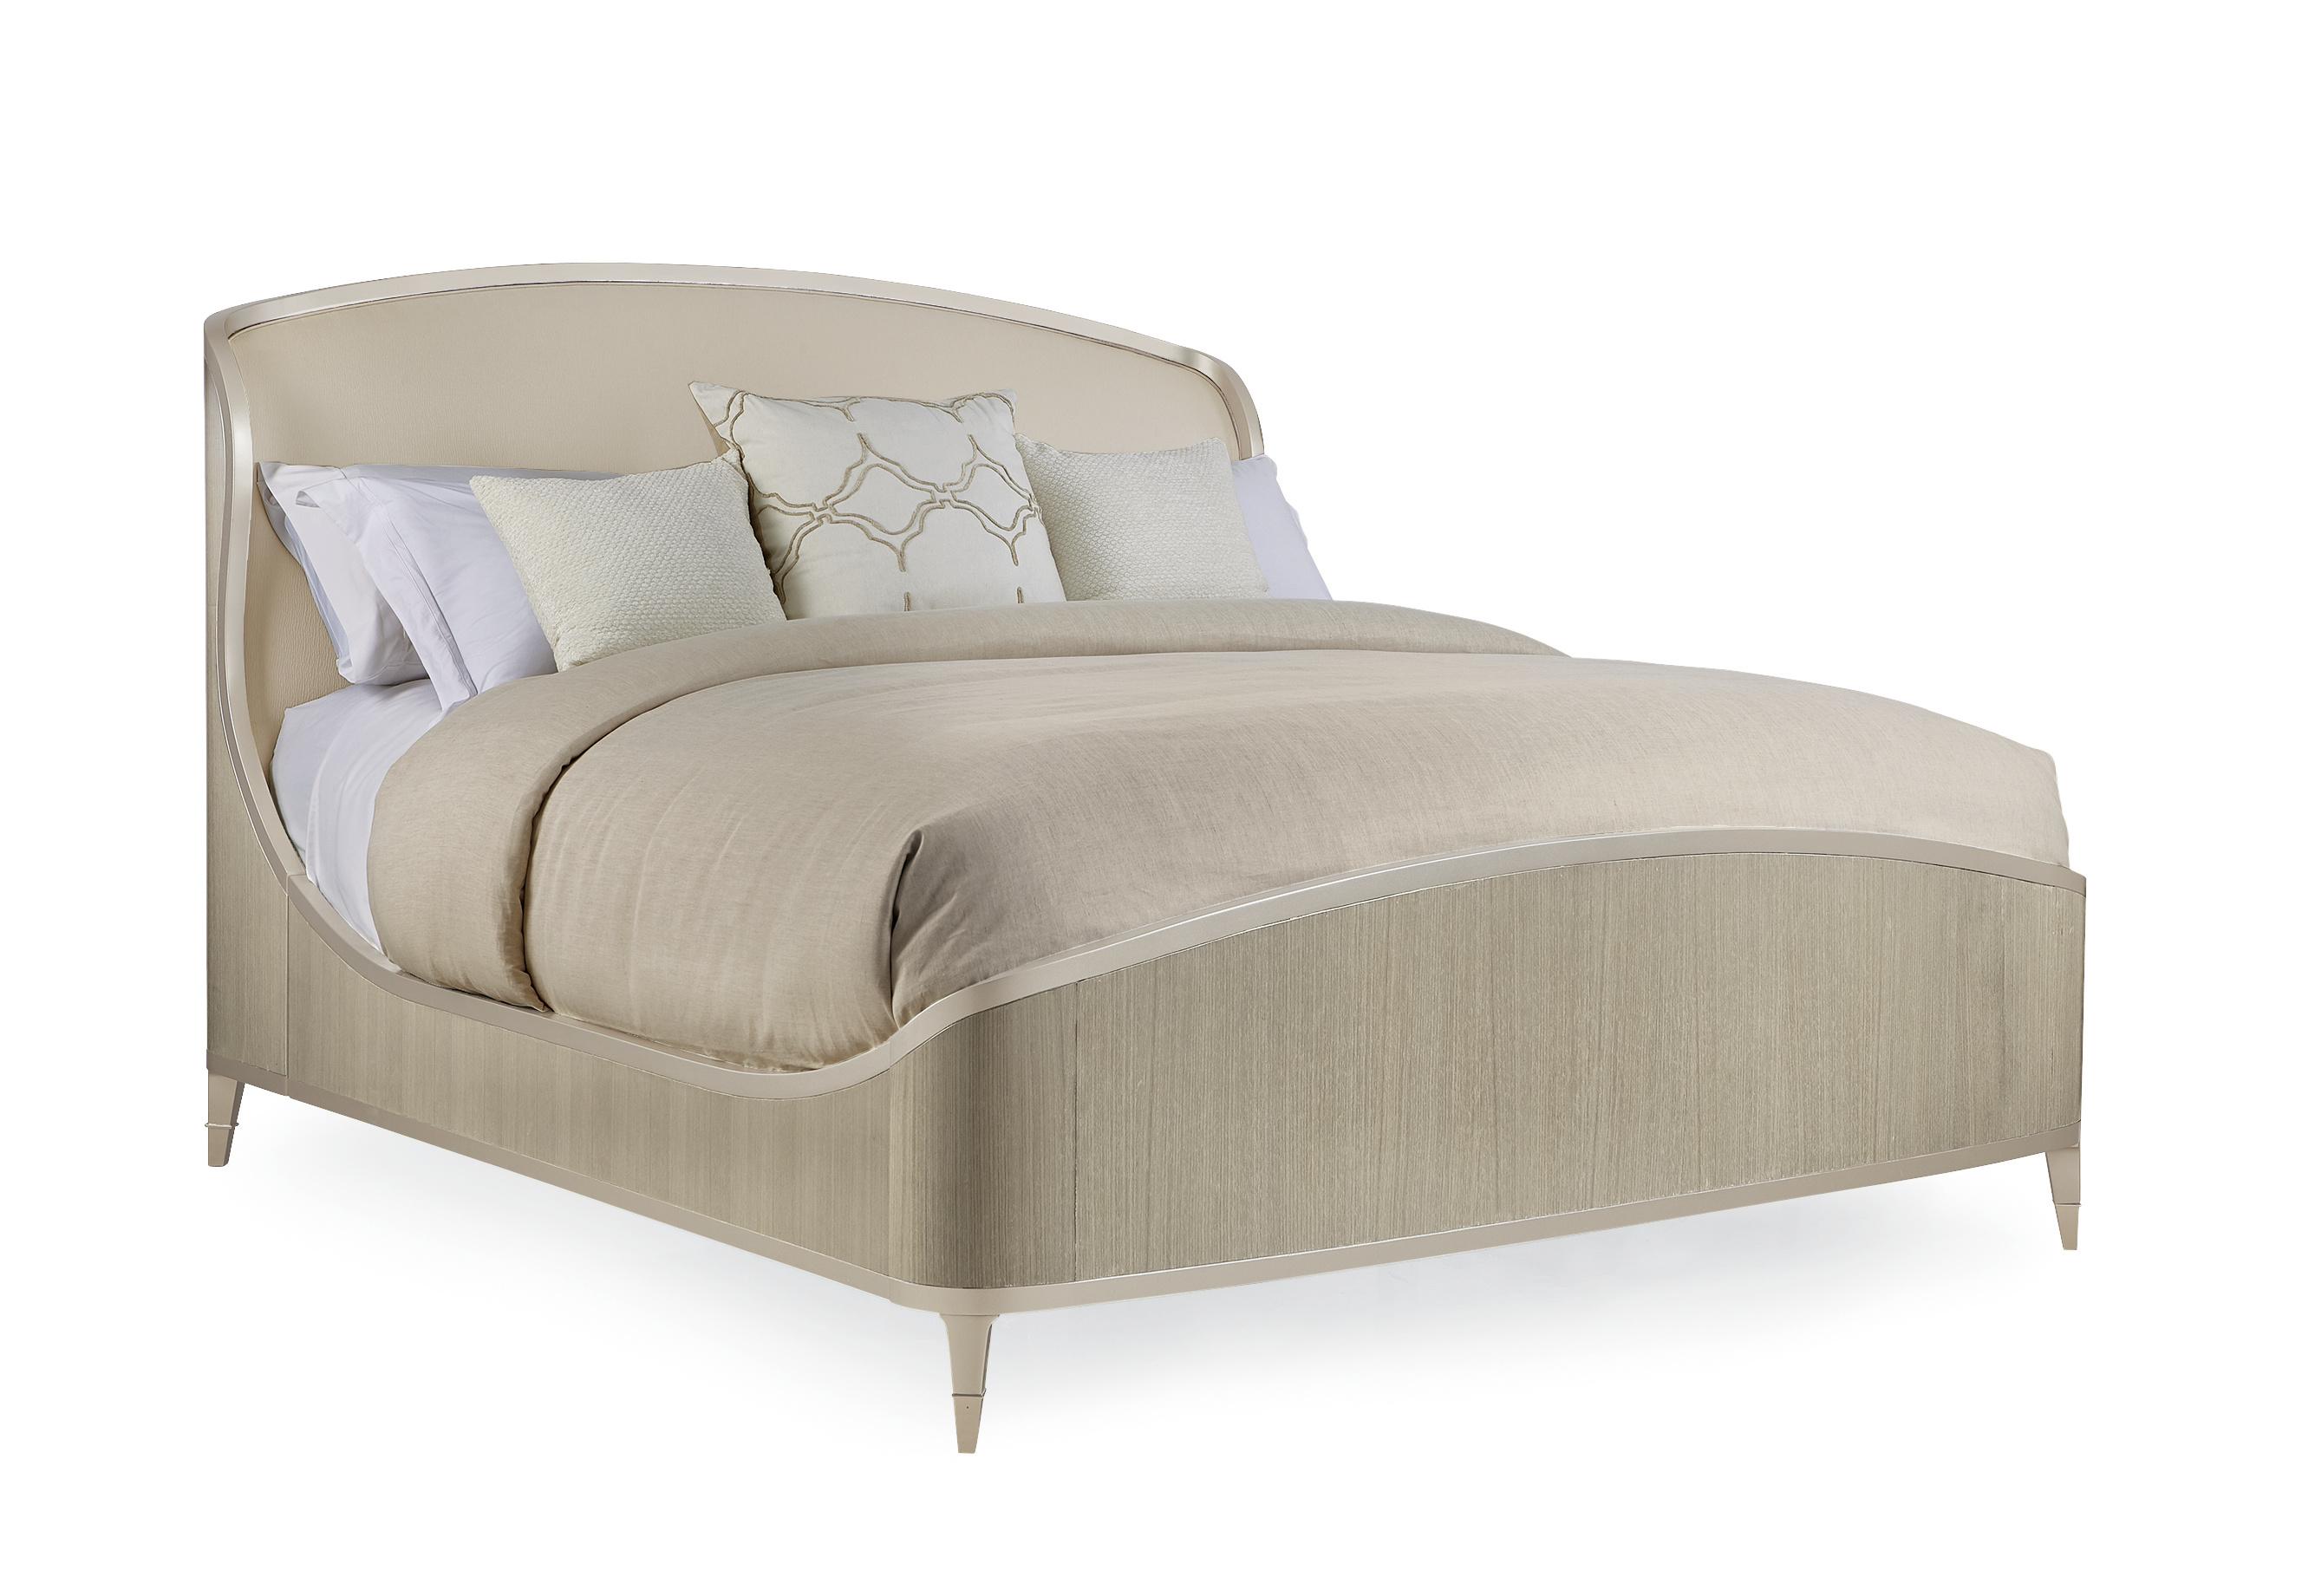 Contemporary Platform Bed Good Nights Sleep CLA-417-146 in Champagne Fabric